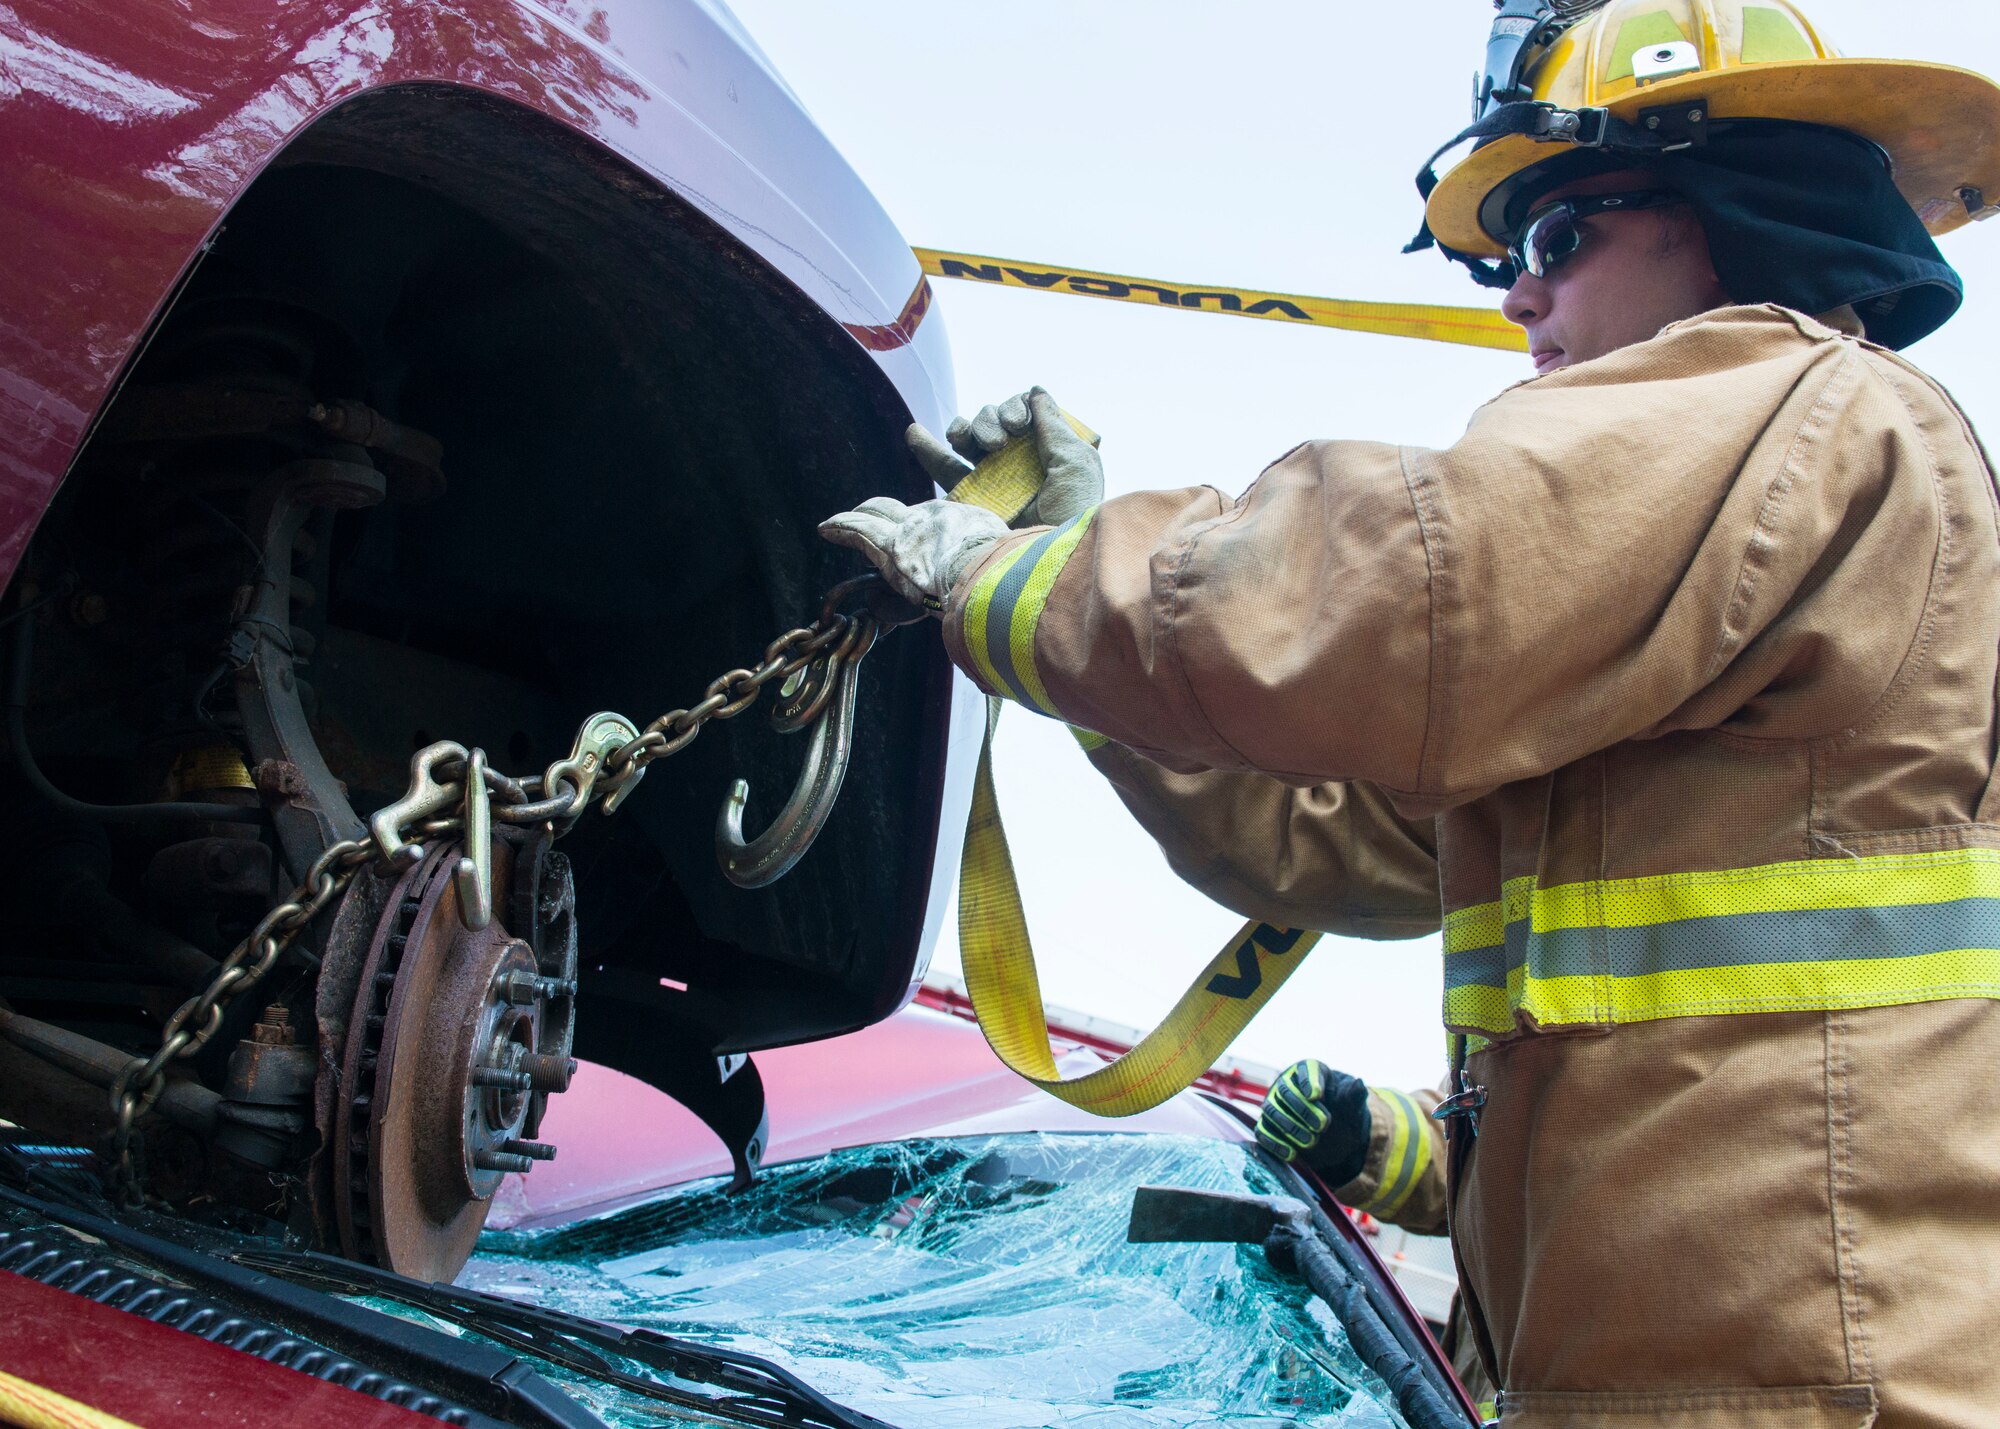 A firefighter assigned to the 103rd Civil Engineer Squadron, Connecticut Air National Guard attempts to remove a vehicle off of another vehicle as part of an auto accident scenario during a rescue strike team exercise, June 1, 2019 in East Granby, Conn. The firefighters trained with members of several local fire departments to ensure continuity in training across departments. (U.S. Air National Guard photo by Tech. Sgt. Tamara R. Dabney)